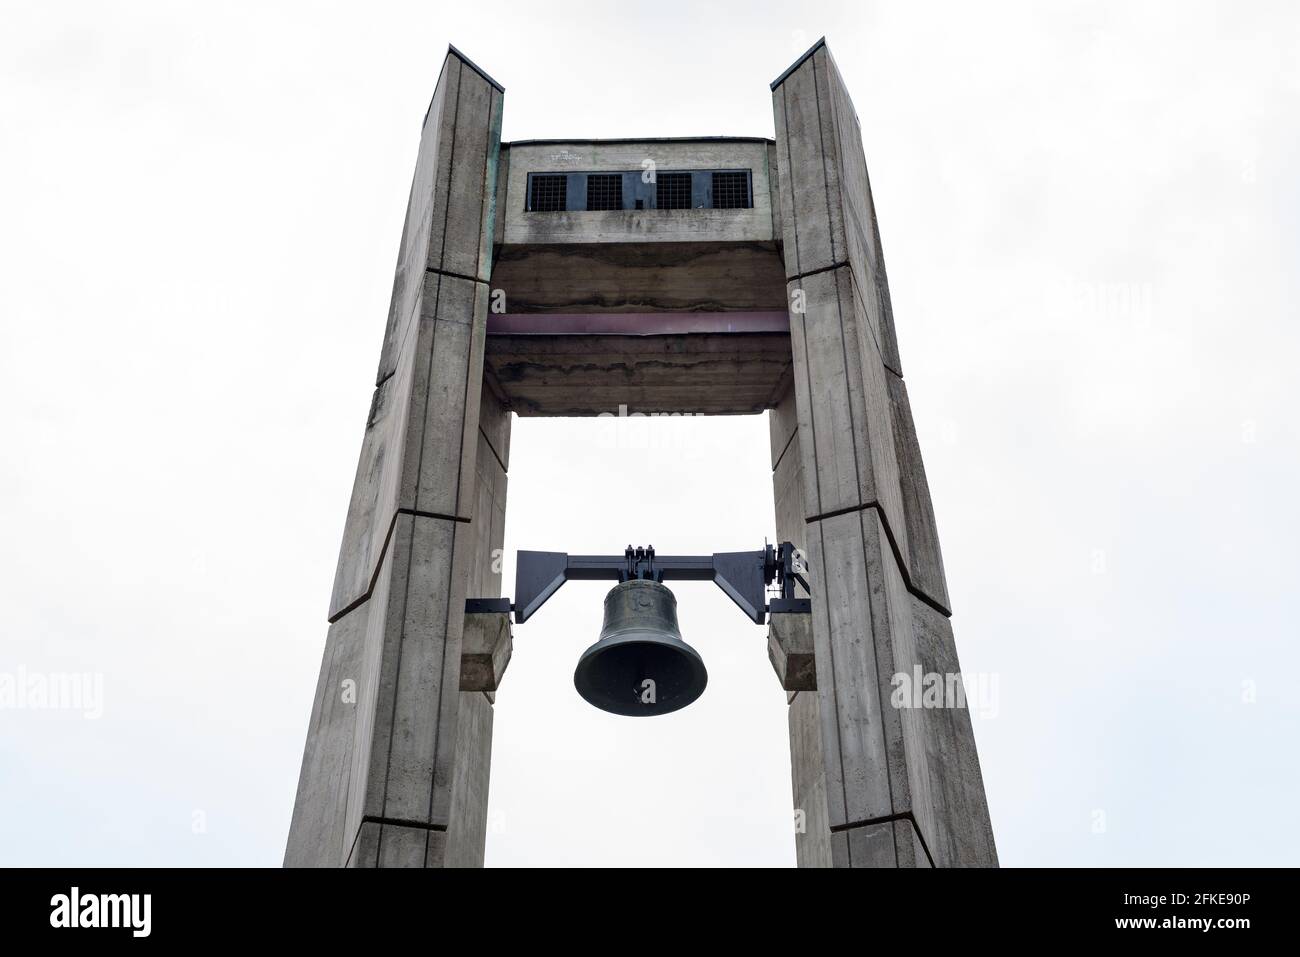 Poznan, wielkopolskie, Poland, 06.07.2019: close-up of the Bell of Peace and Friendship Among Nations monument in Cytadela park, Poznań, Poland Stock Photo